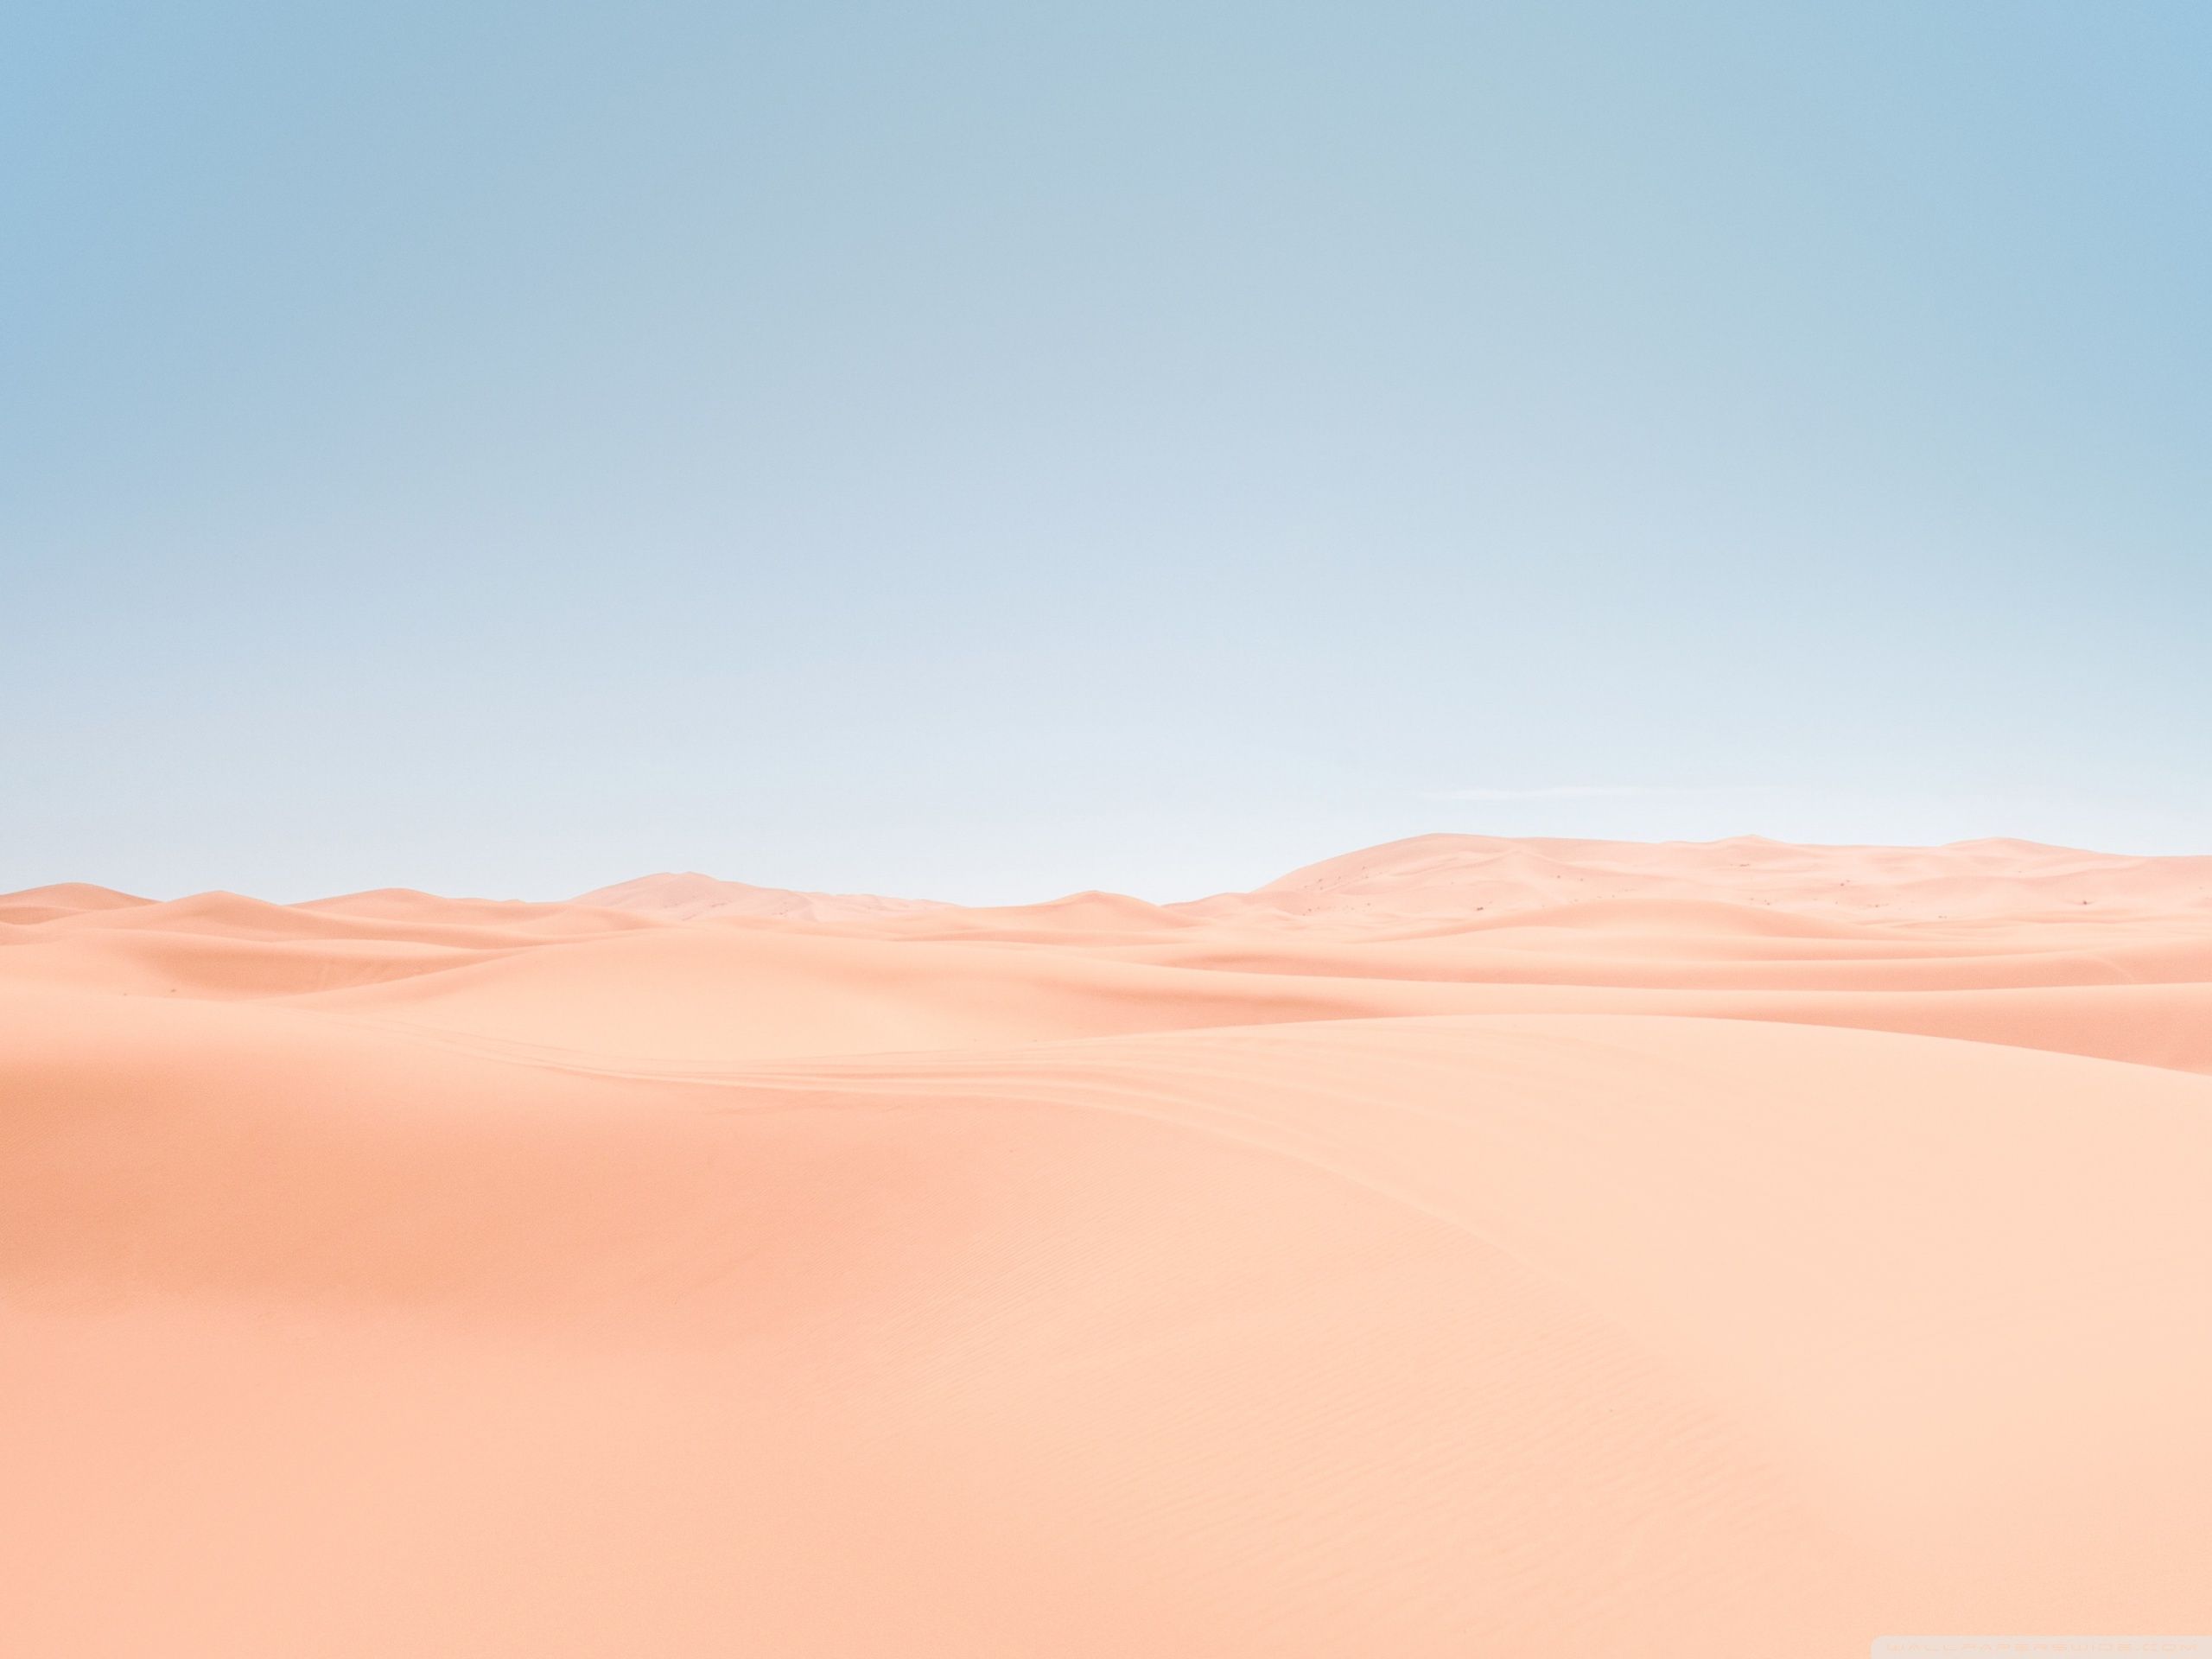 A picture of an empty desert with sand dunes - Desert